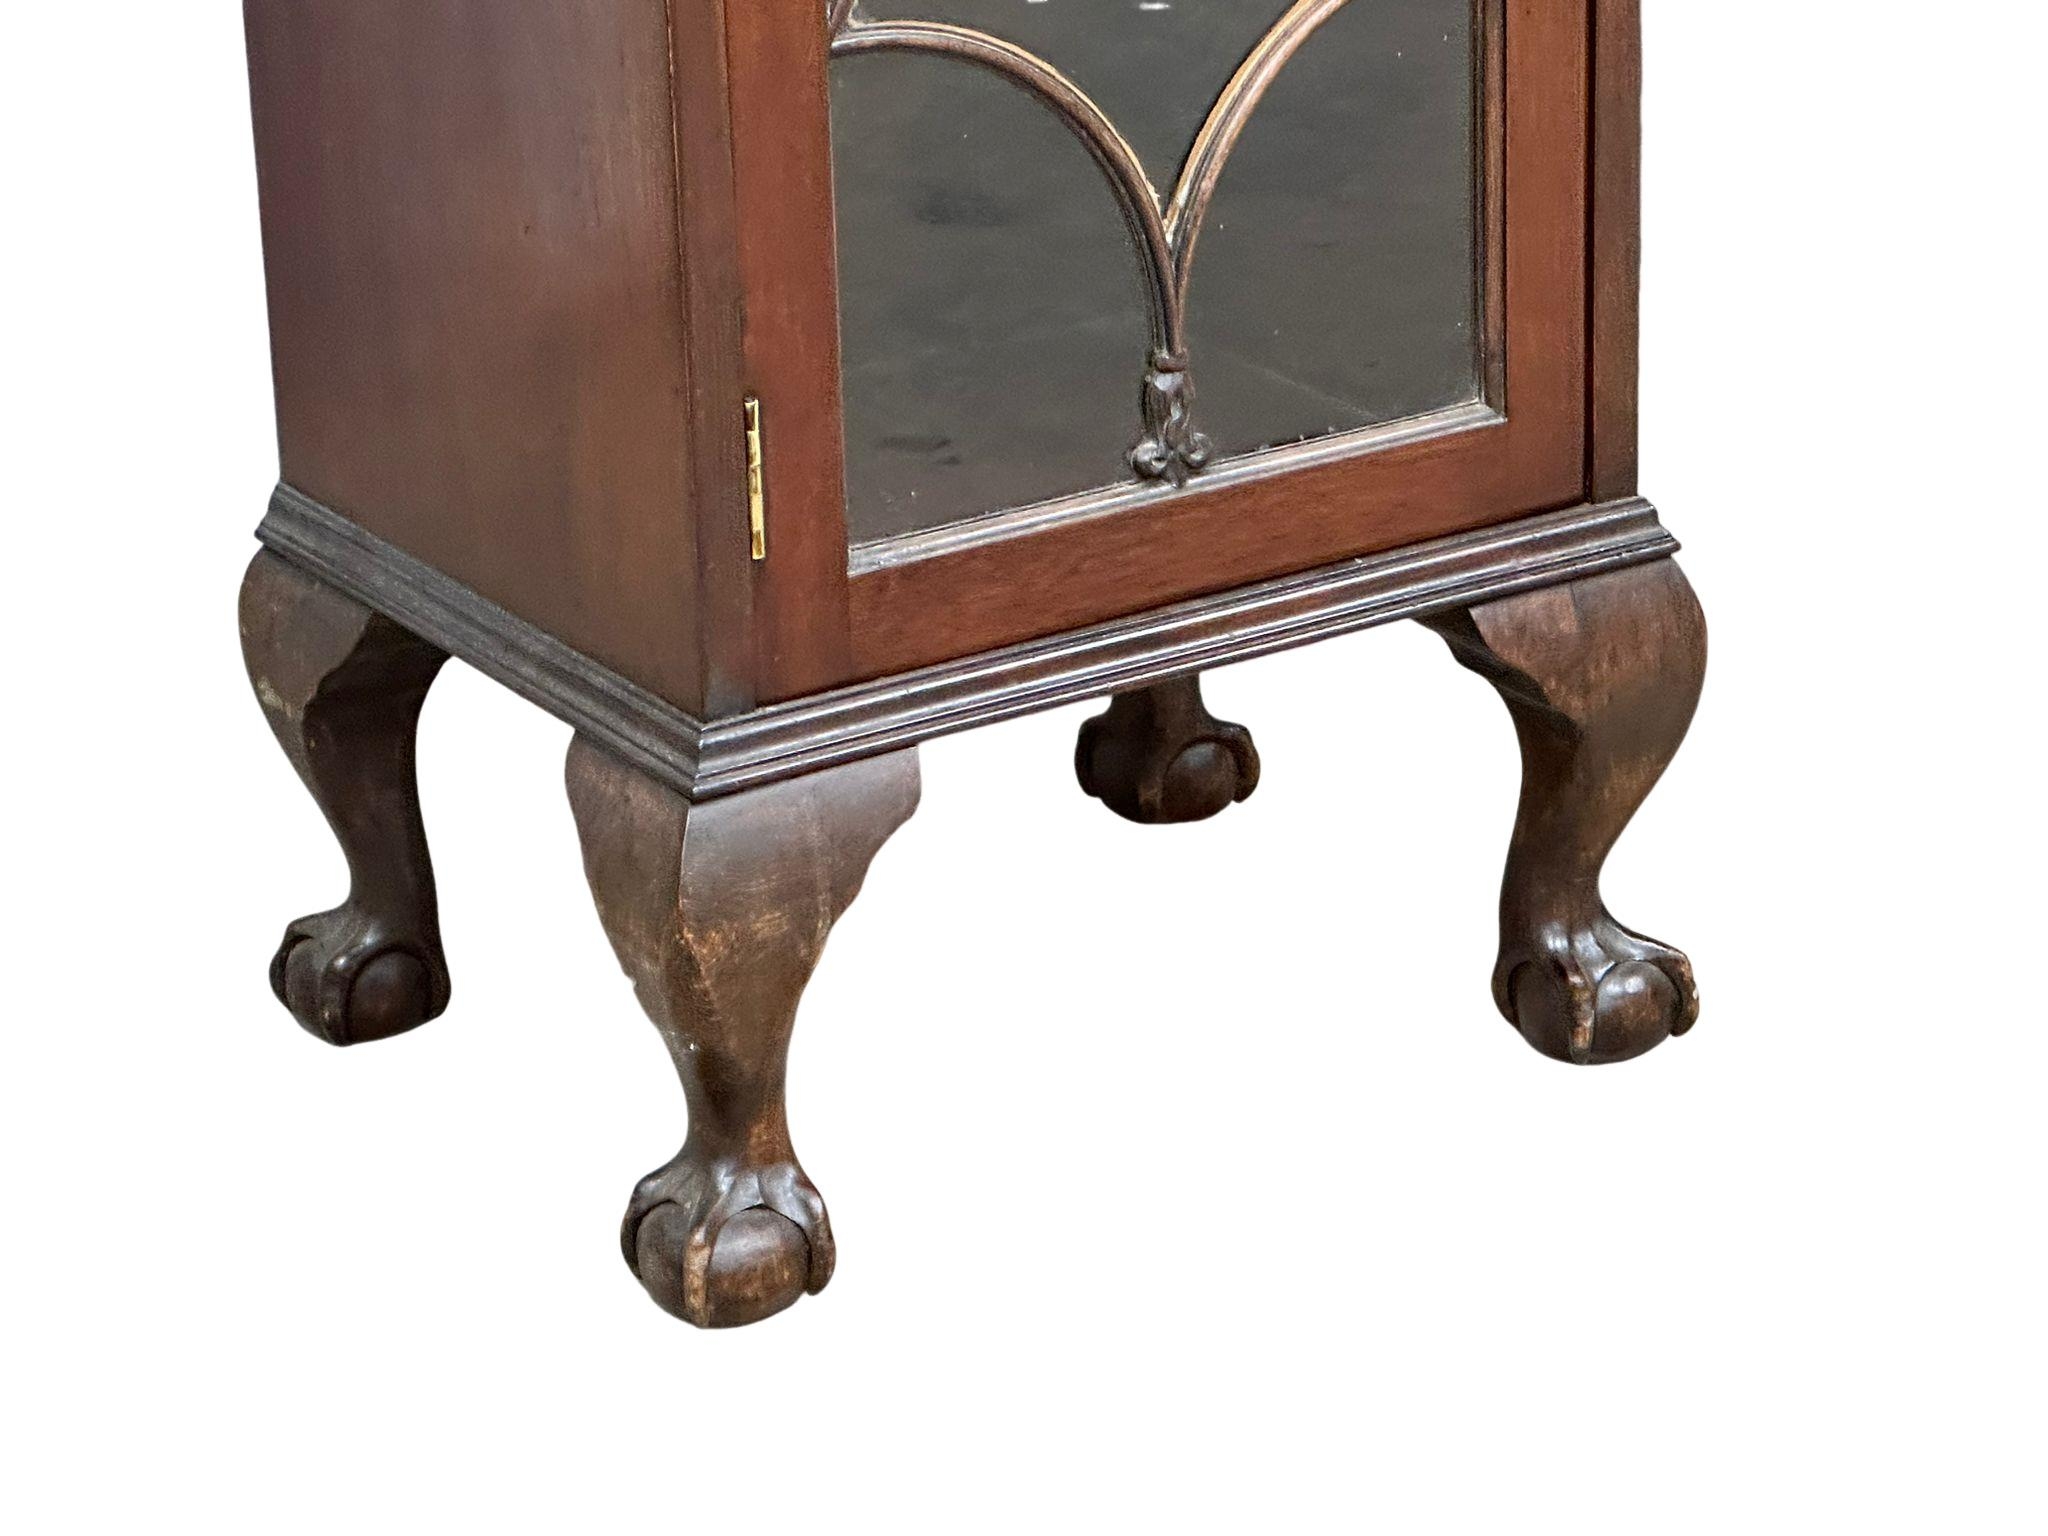 A large, early 20th Century Chippendale Revival bureau display cabinet. Circa 1910-1930. - Image 4 of 4